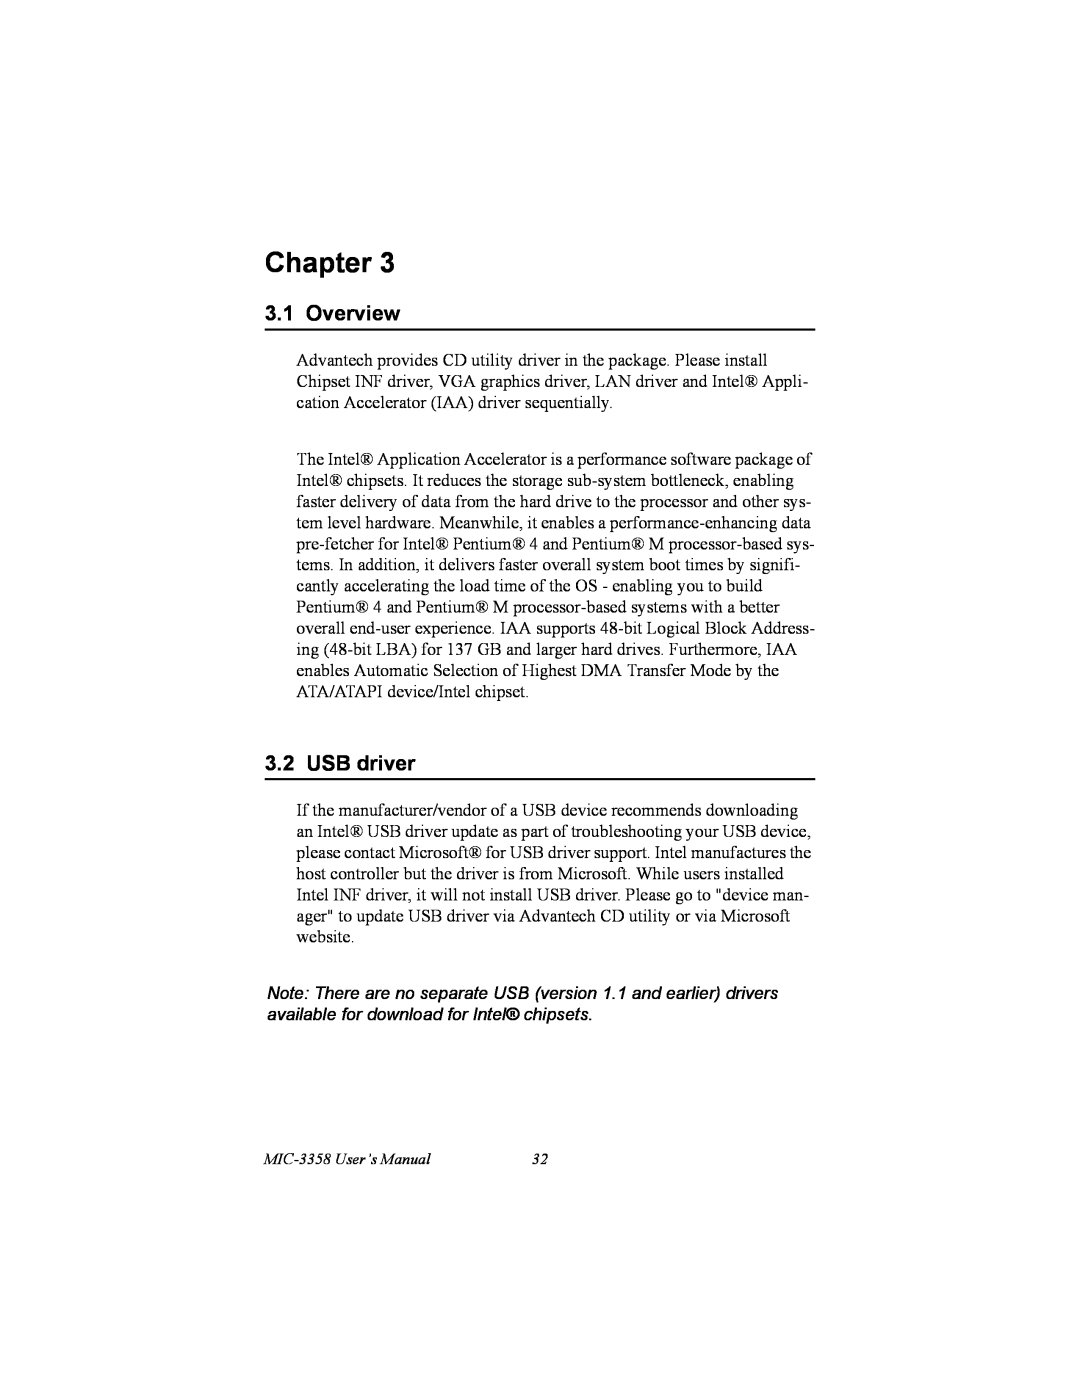 Intel MIC-3358 user manual Chapter, Overview, USB driver 